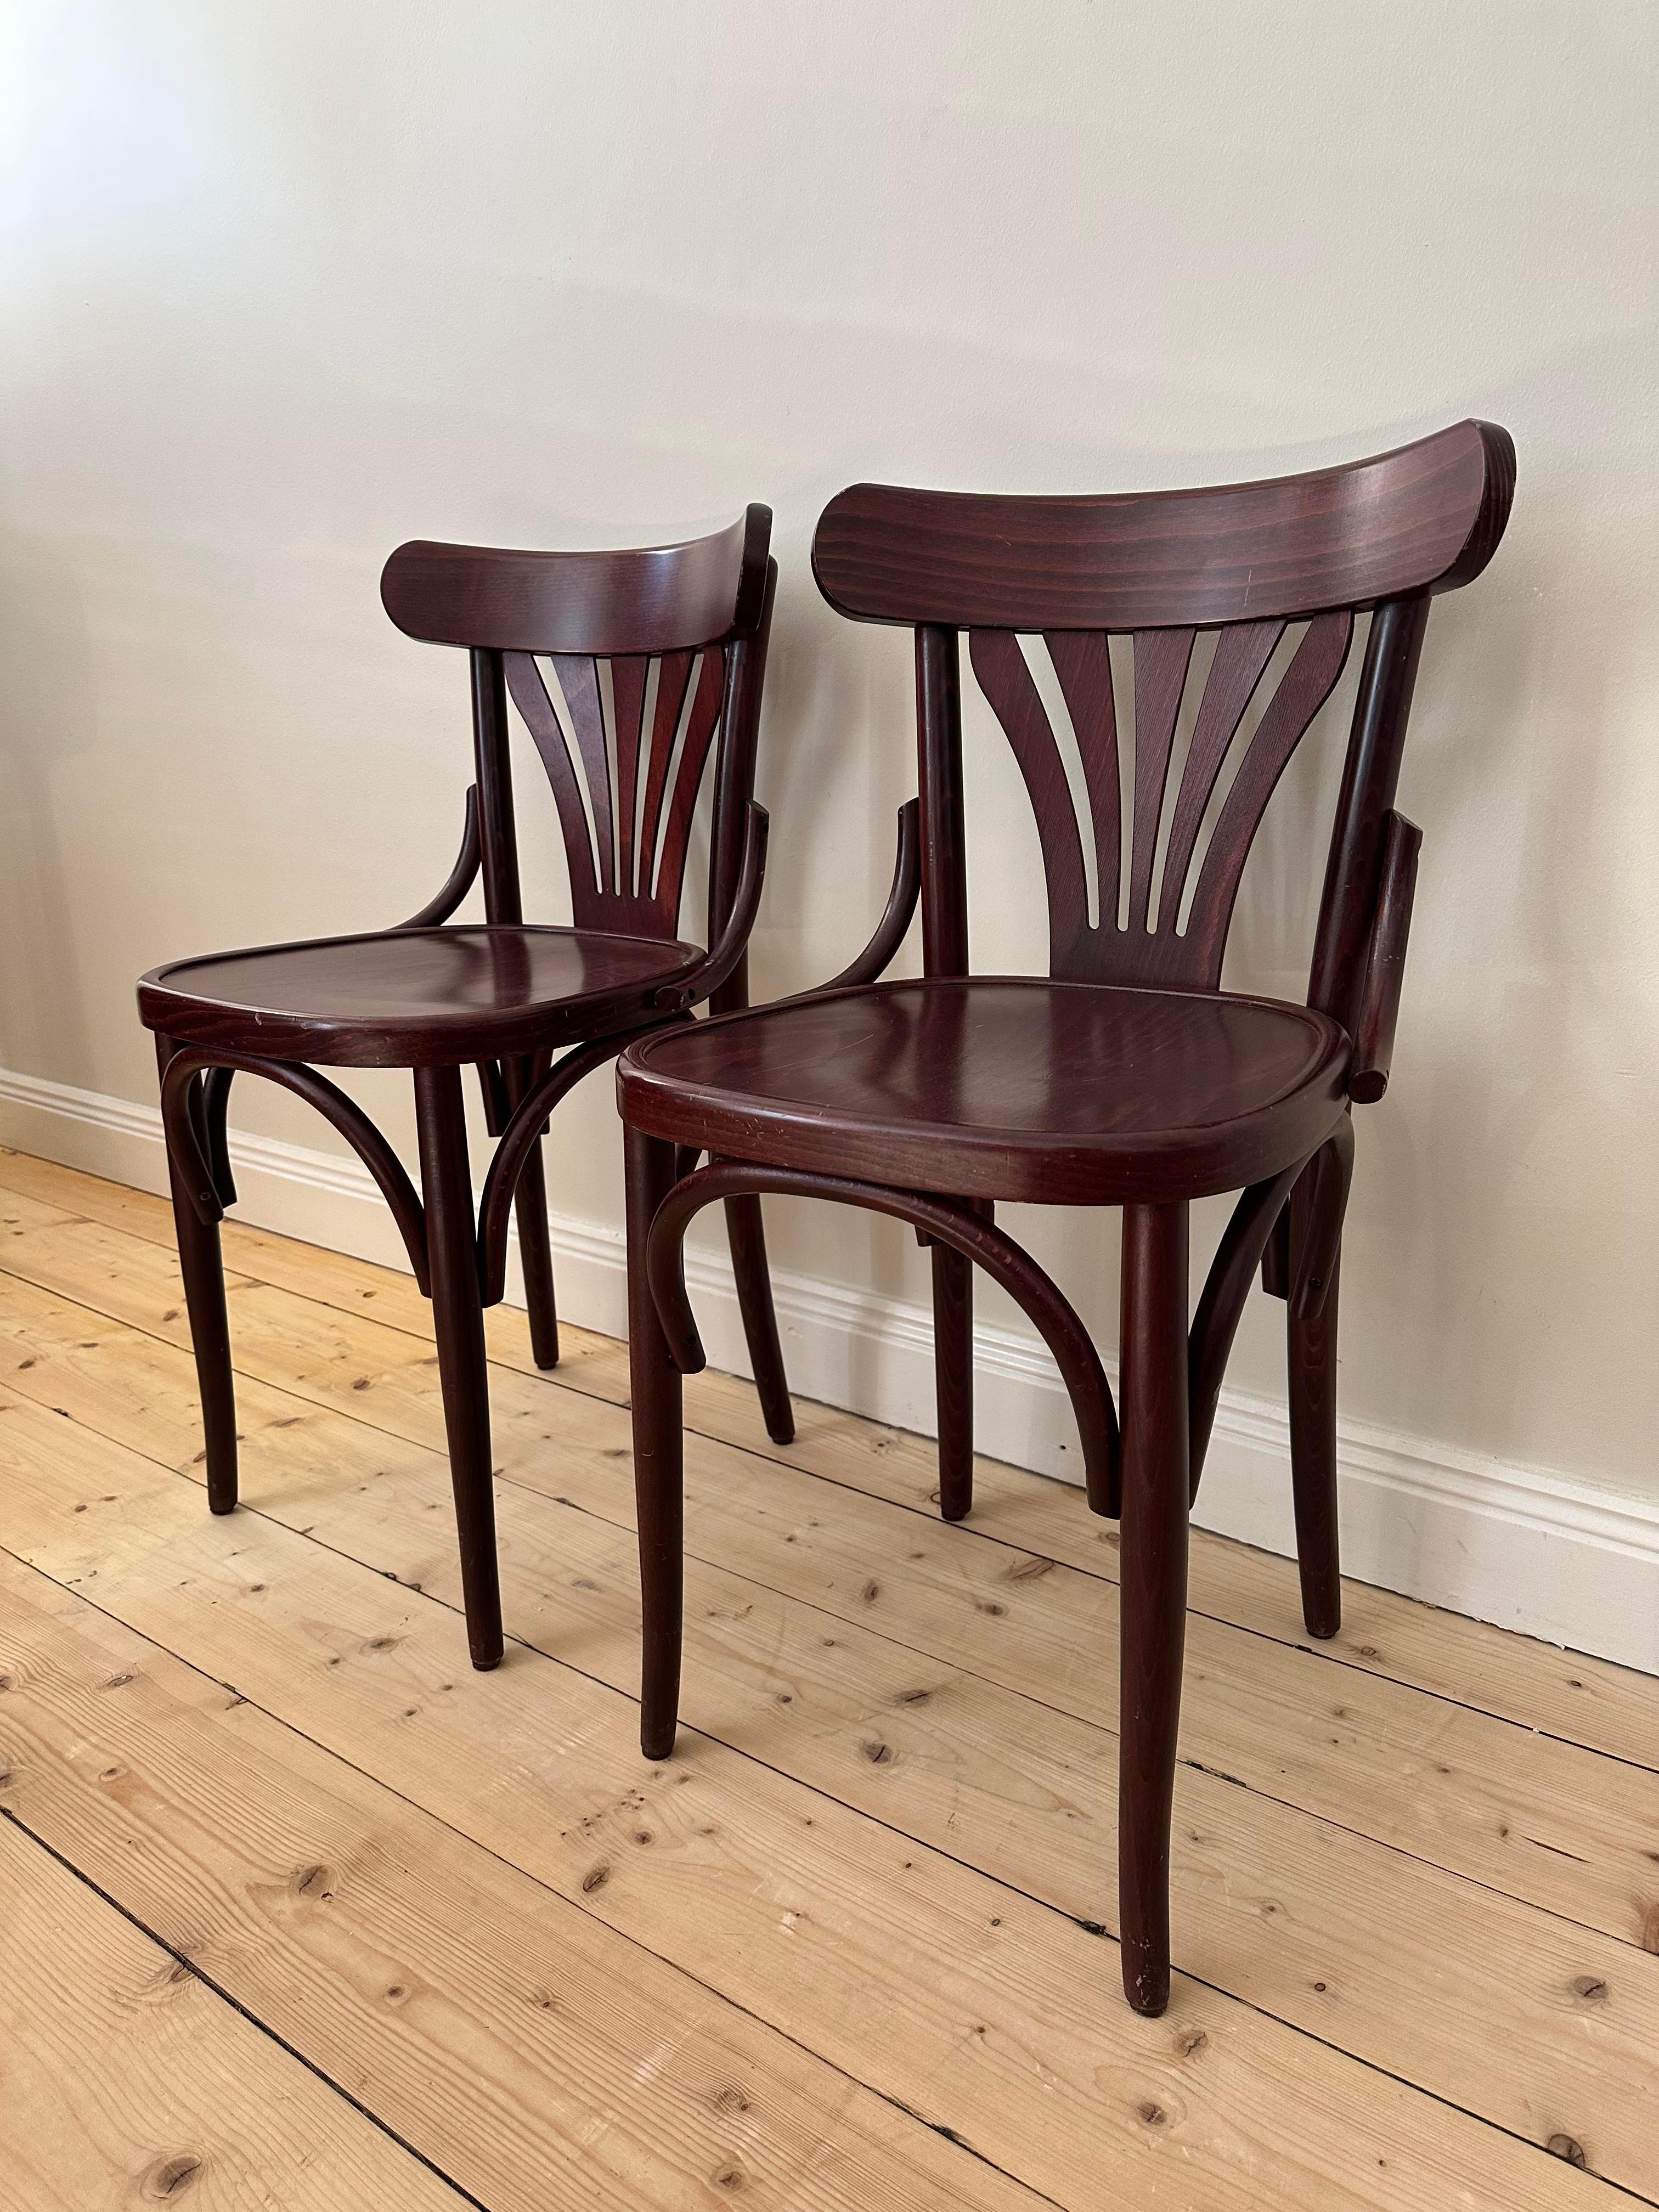 6 bistro chairs from Paris In Good Condition For Sale In Älvsjö, SE